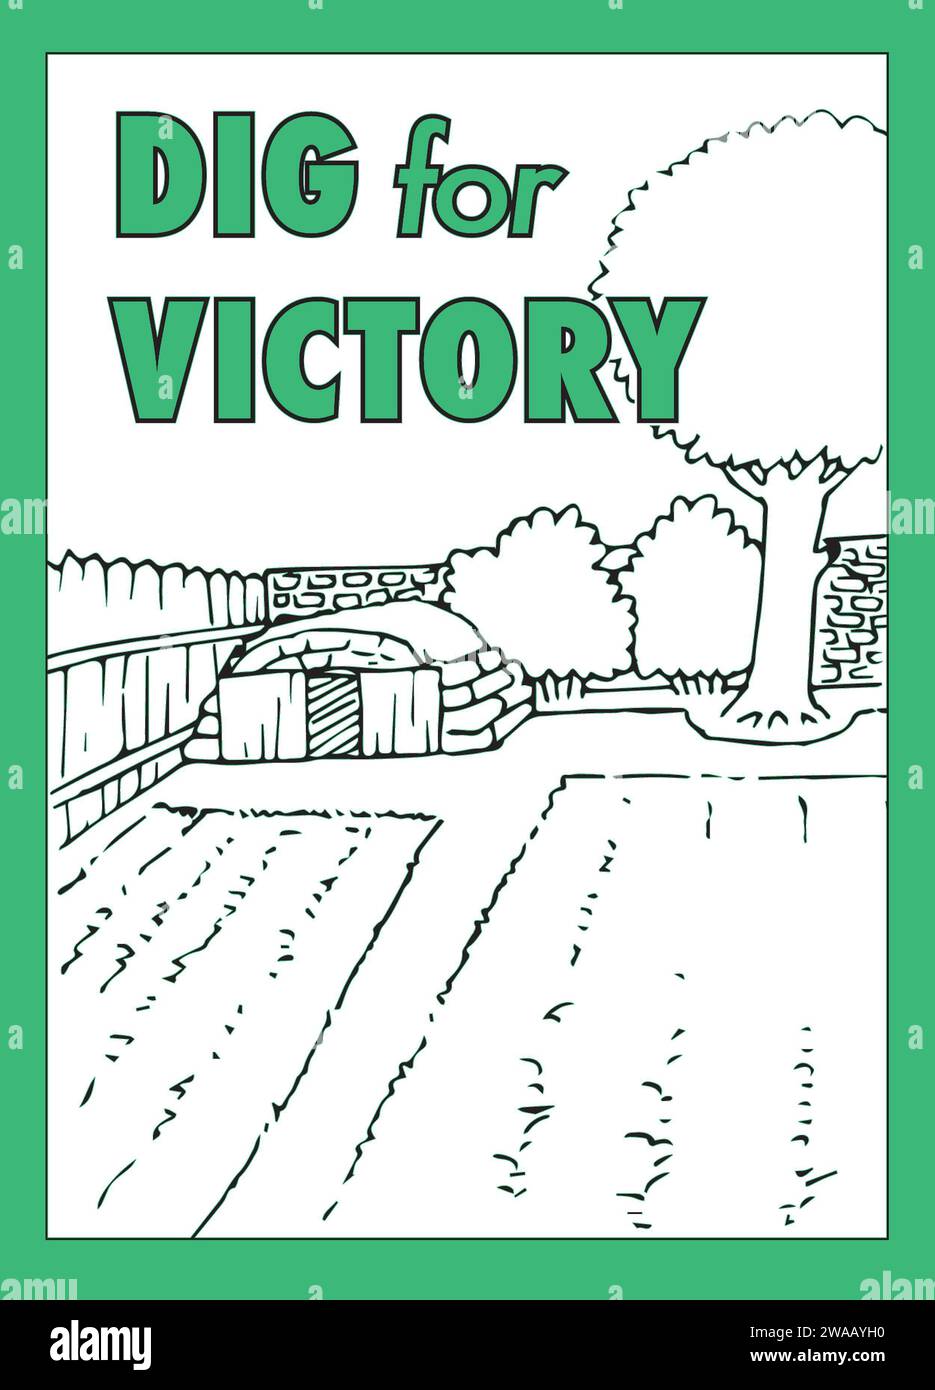 Art colouring in activity, educational resource, World War II, Dig For Victory poster, school, home schooling, lesson plan, poster art, worksheet Stock Photo